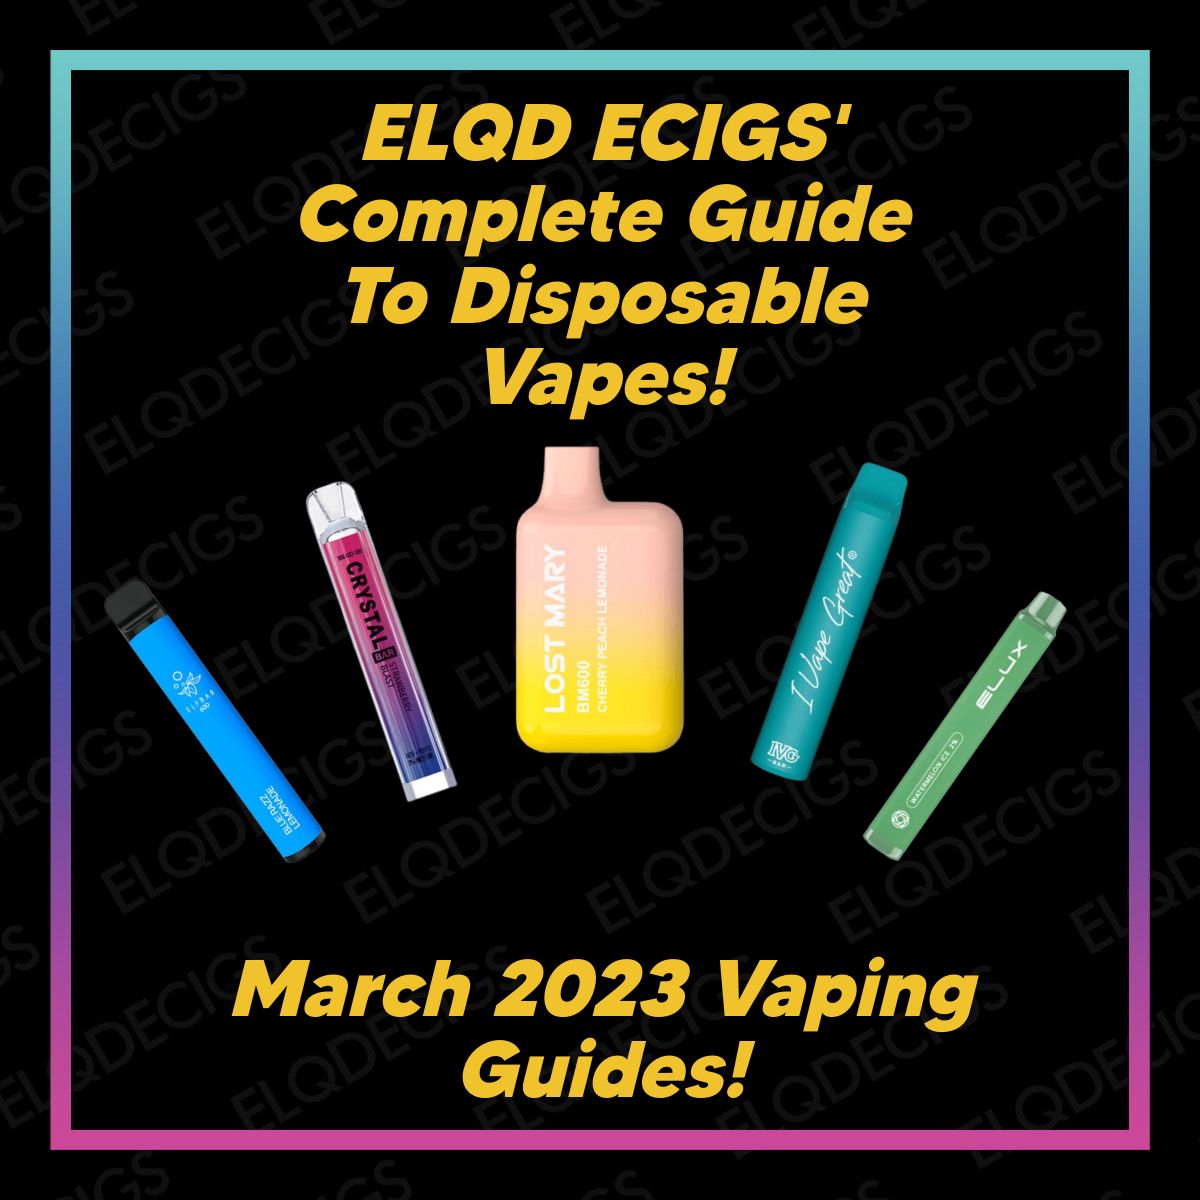 Read More About The Article How Many Cigarettes Are In My Disposable Vape? Elqd Ecigs’s March 2023 Complete Guide To Disposable Vapes!